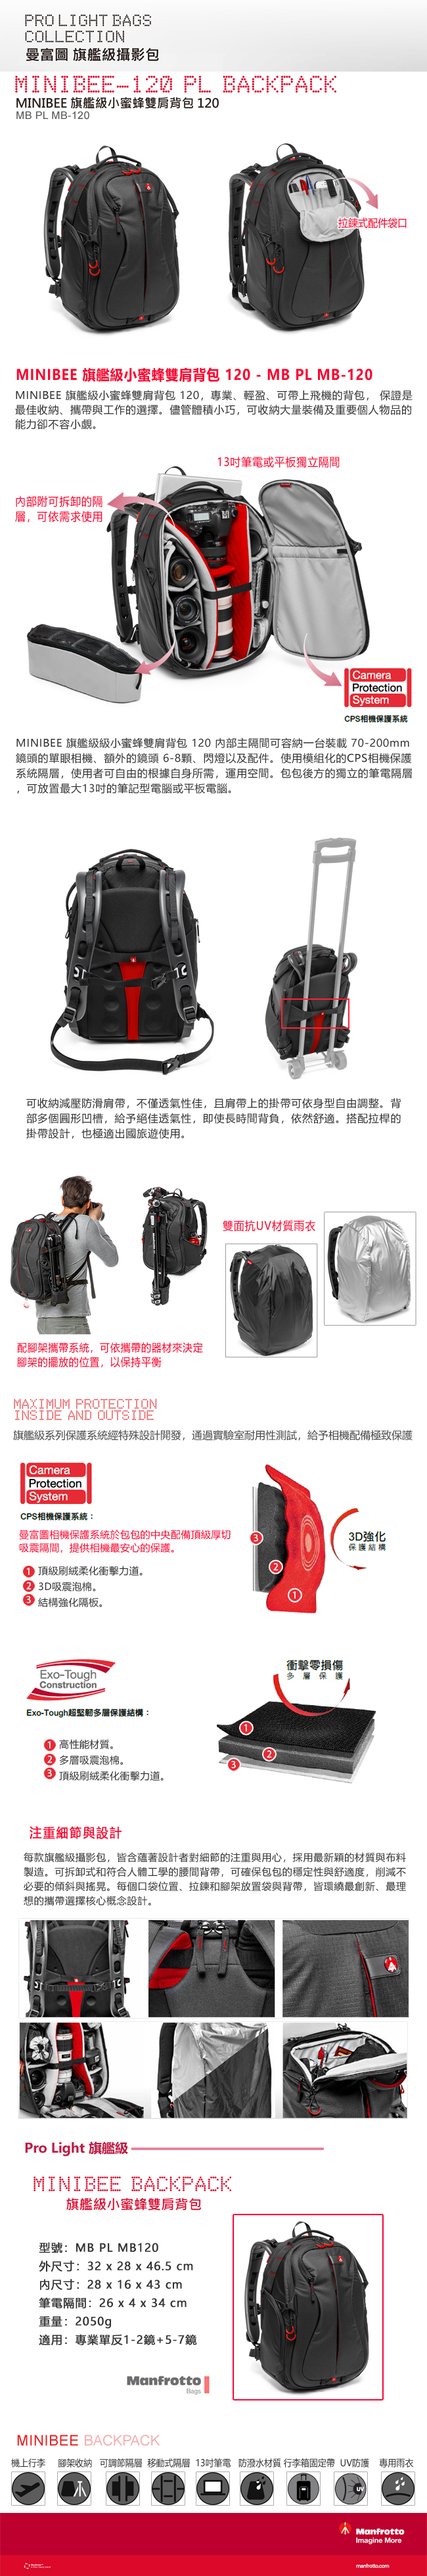 Manfrotto Minibee-120 PL Backpack旗艦級小黃蜂雙肩背包